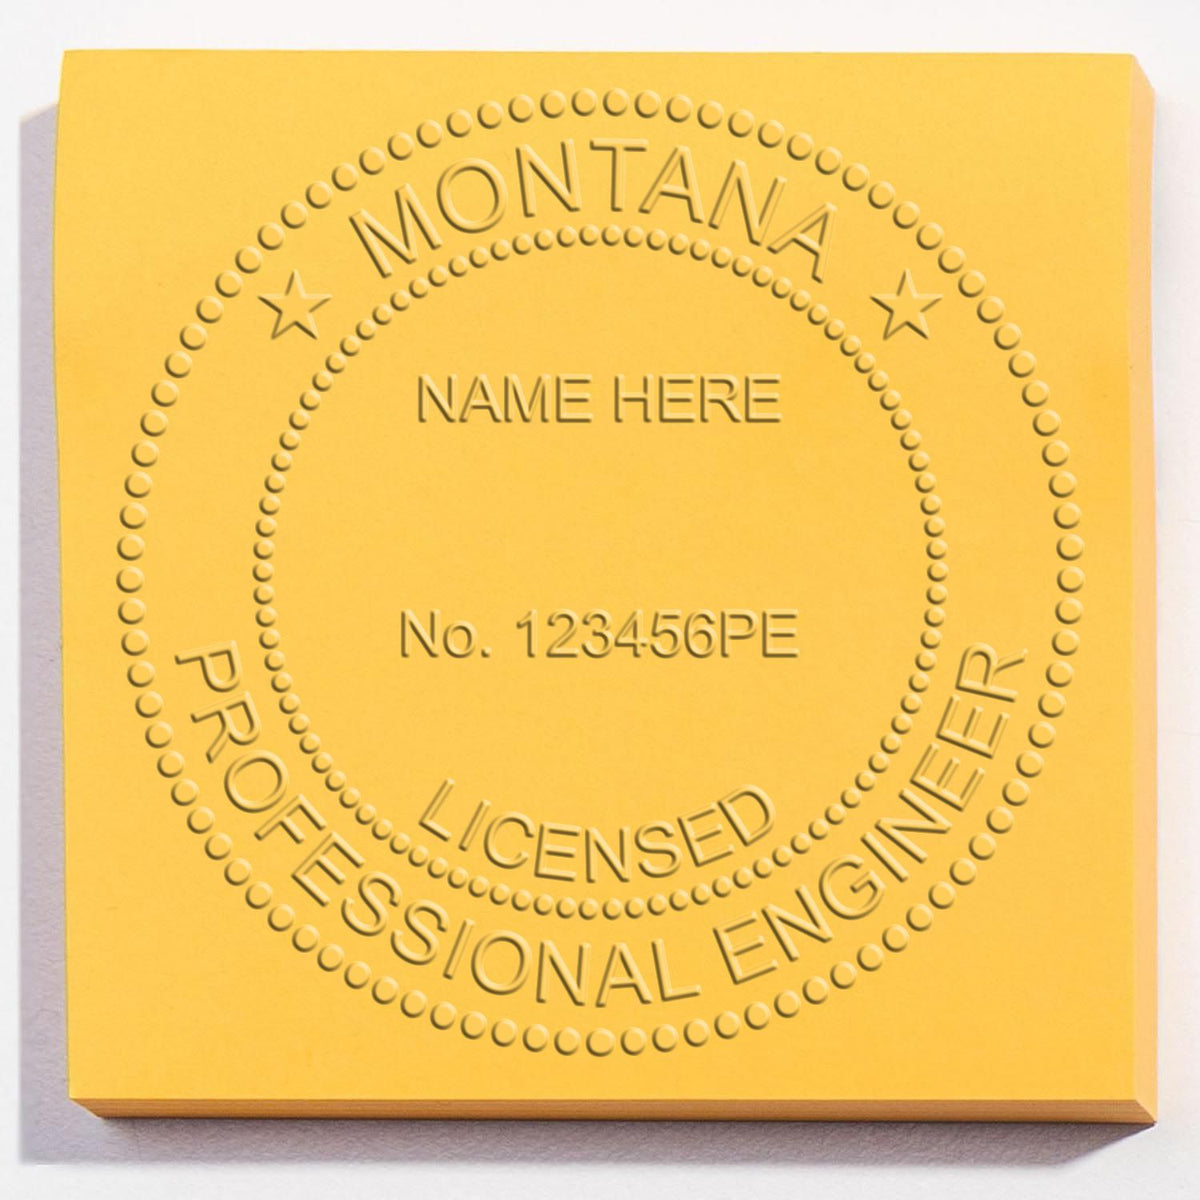 A lifestyle photo showing a stamped image of the Handheld Montana Professional Engineer Embosser on a piece of paper